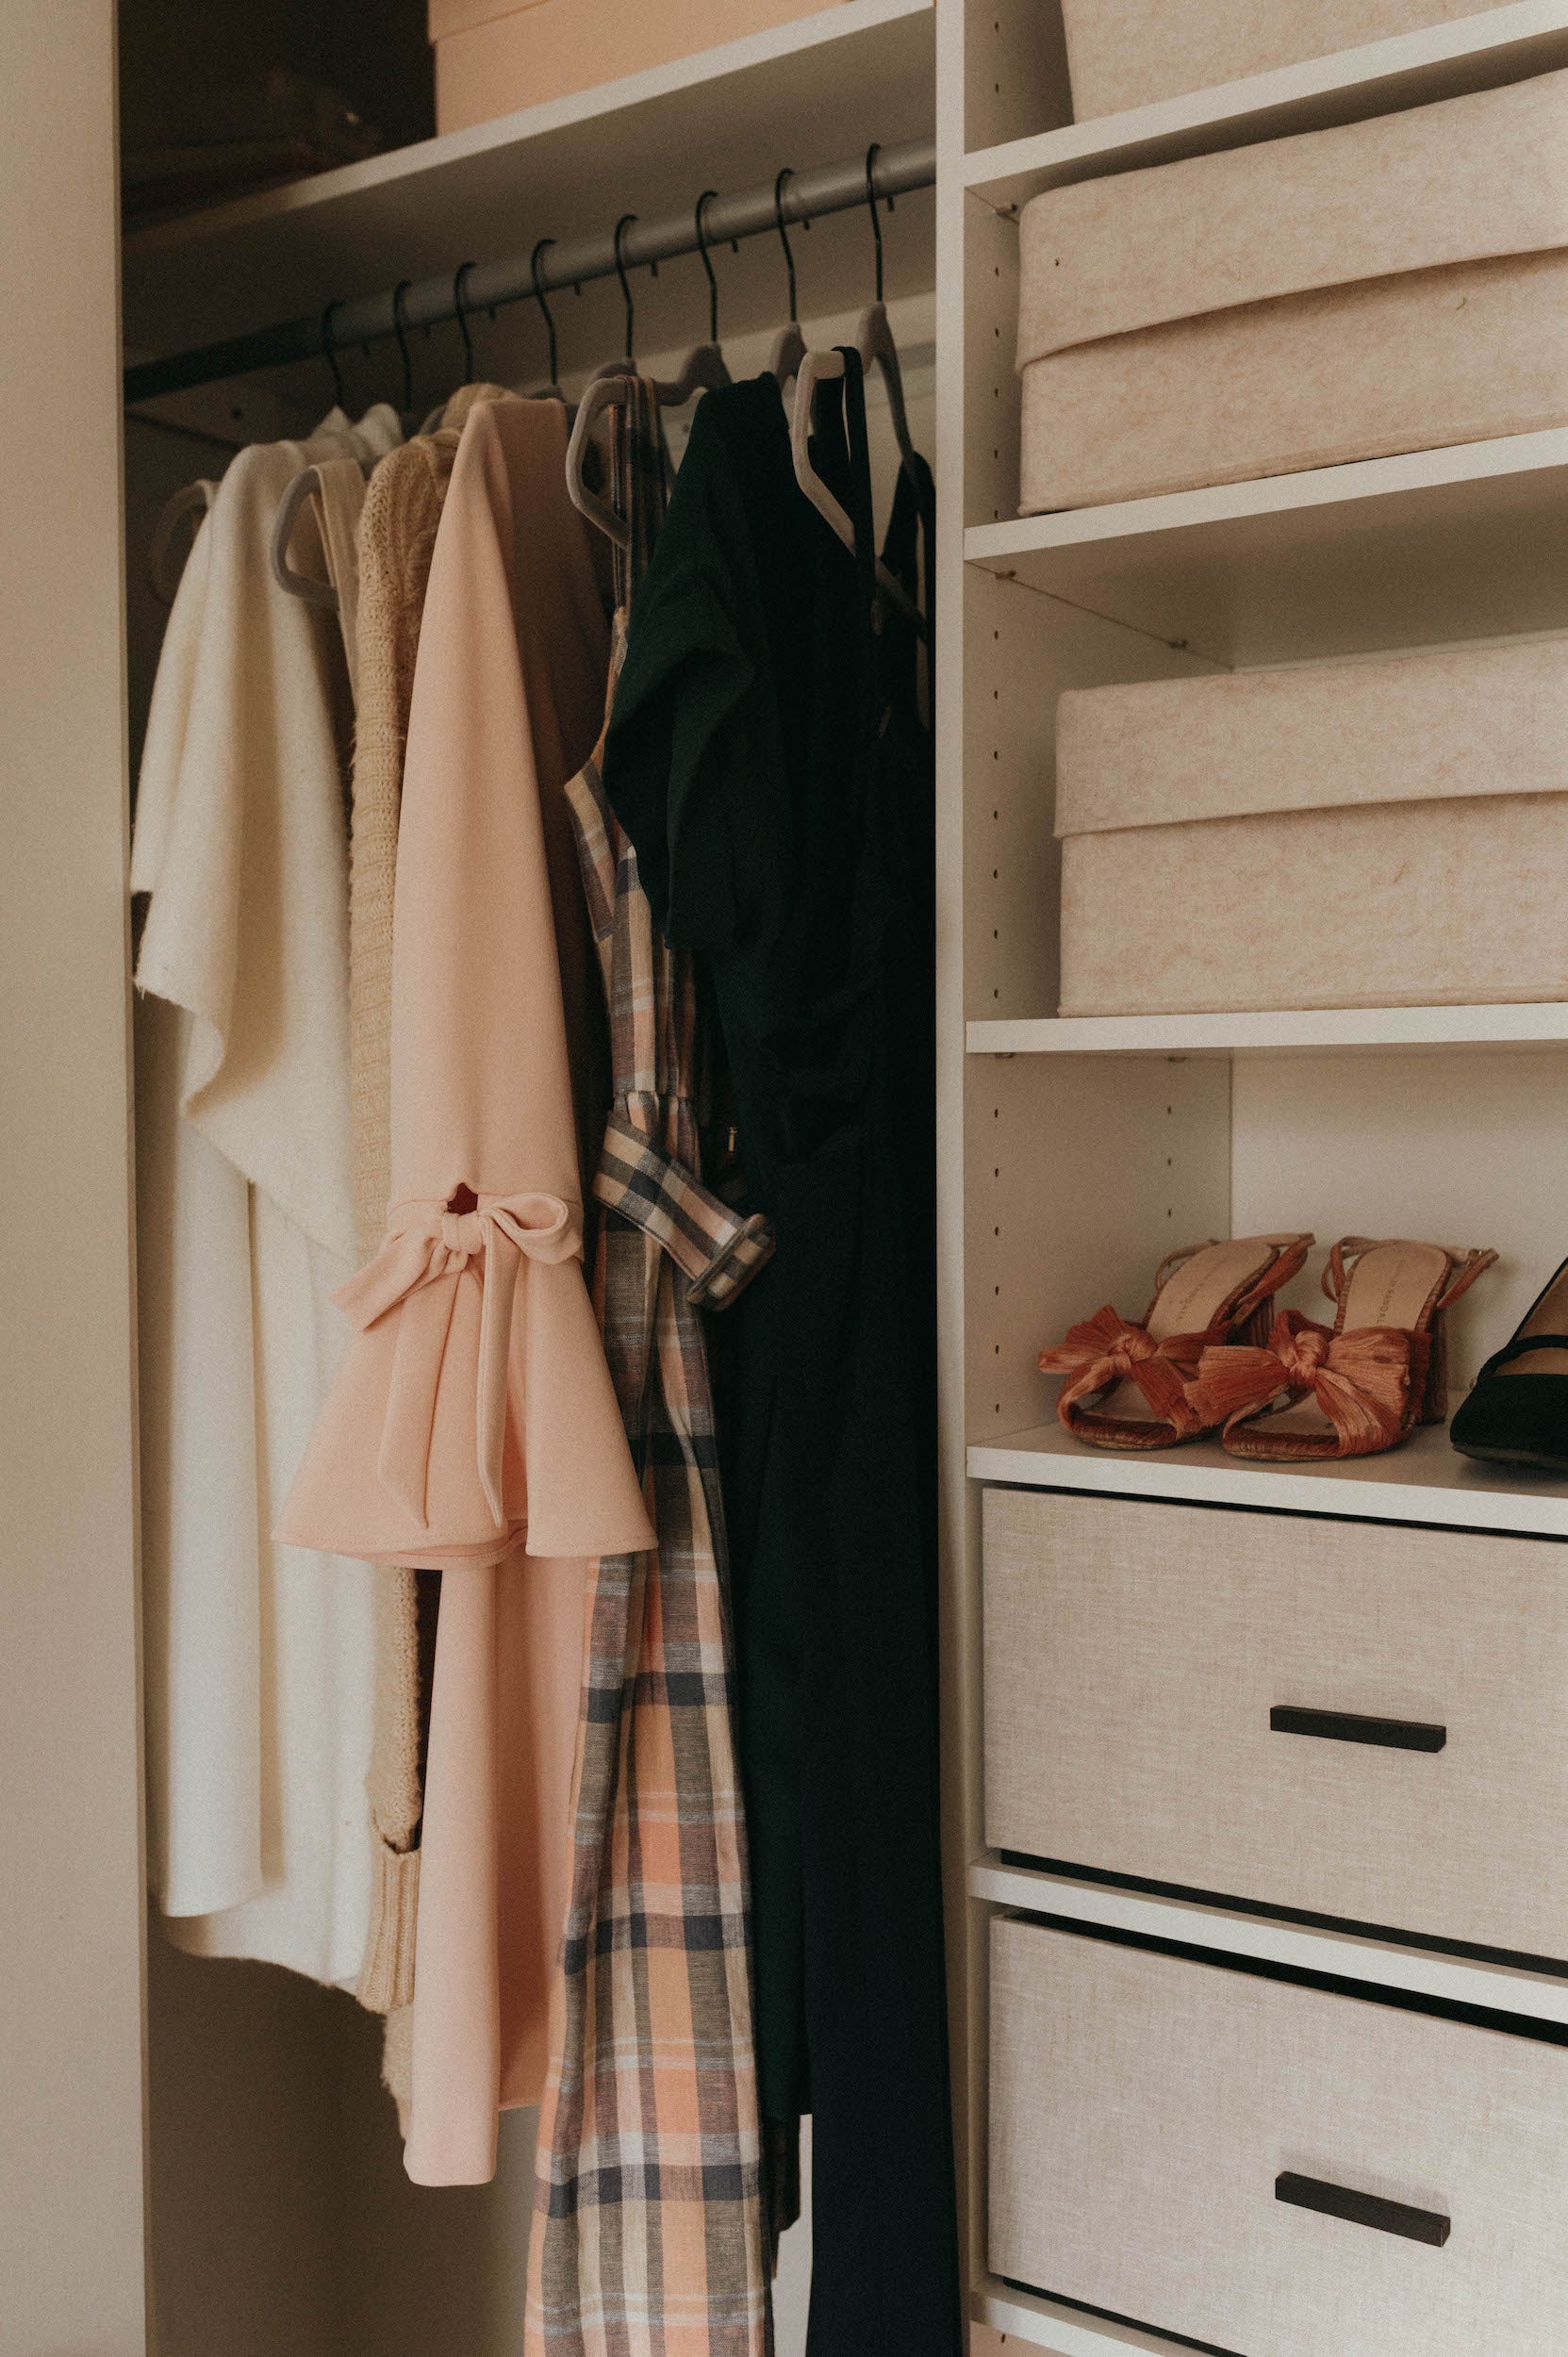 Personal Shopper and Personal Stylist Cassandra Elizabeth will edit your closet and help you create a minimalist Wardrobe filled with quiet luxury brands.  